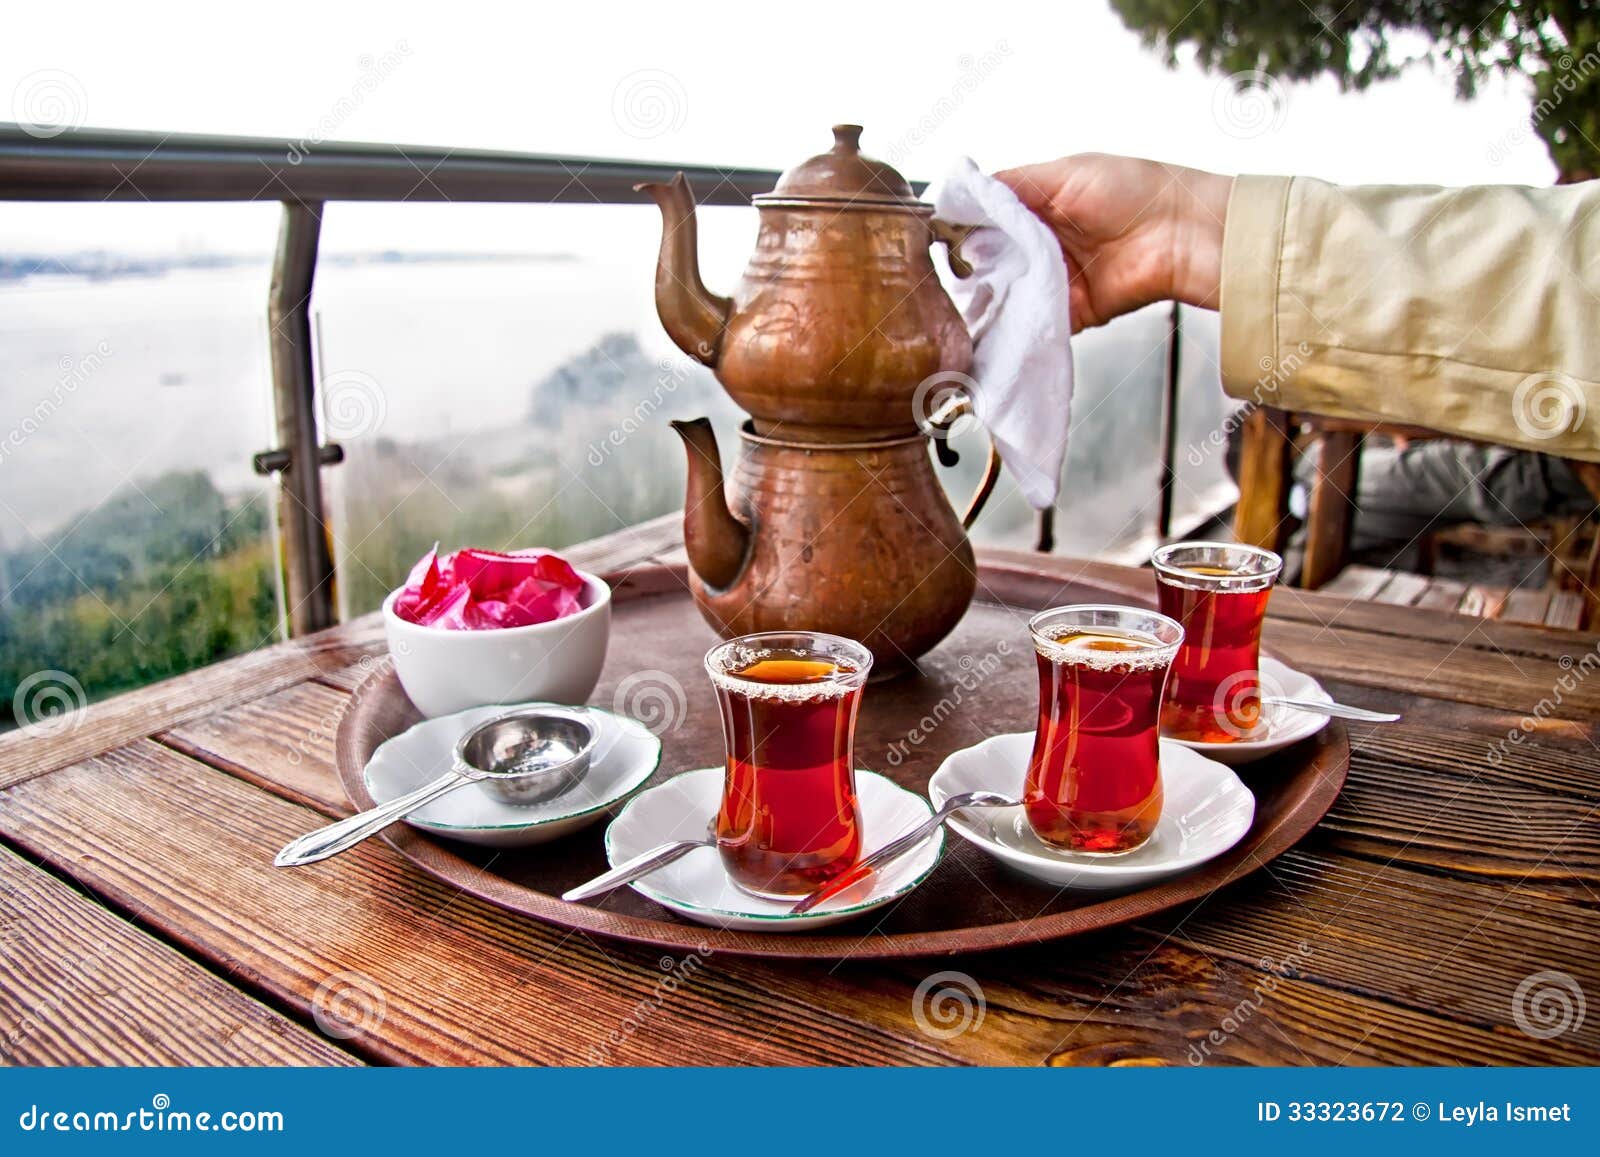 drinking traditional turkish tea with friends